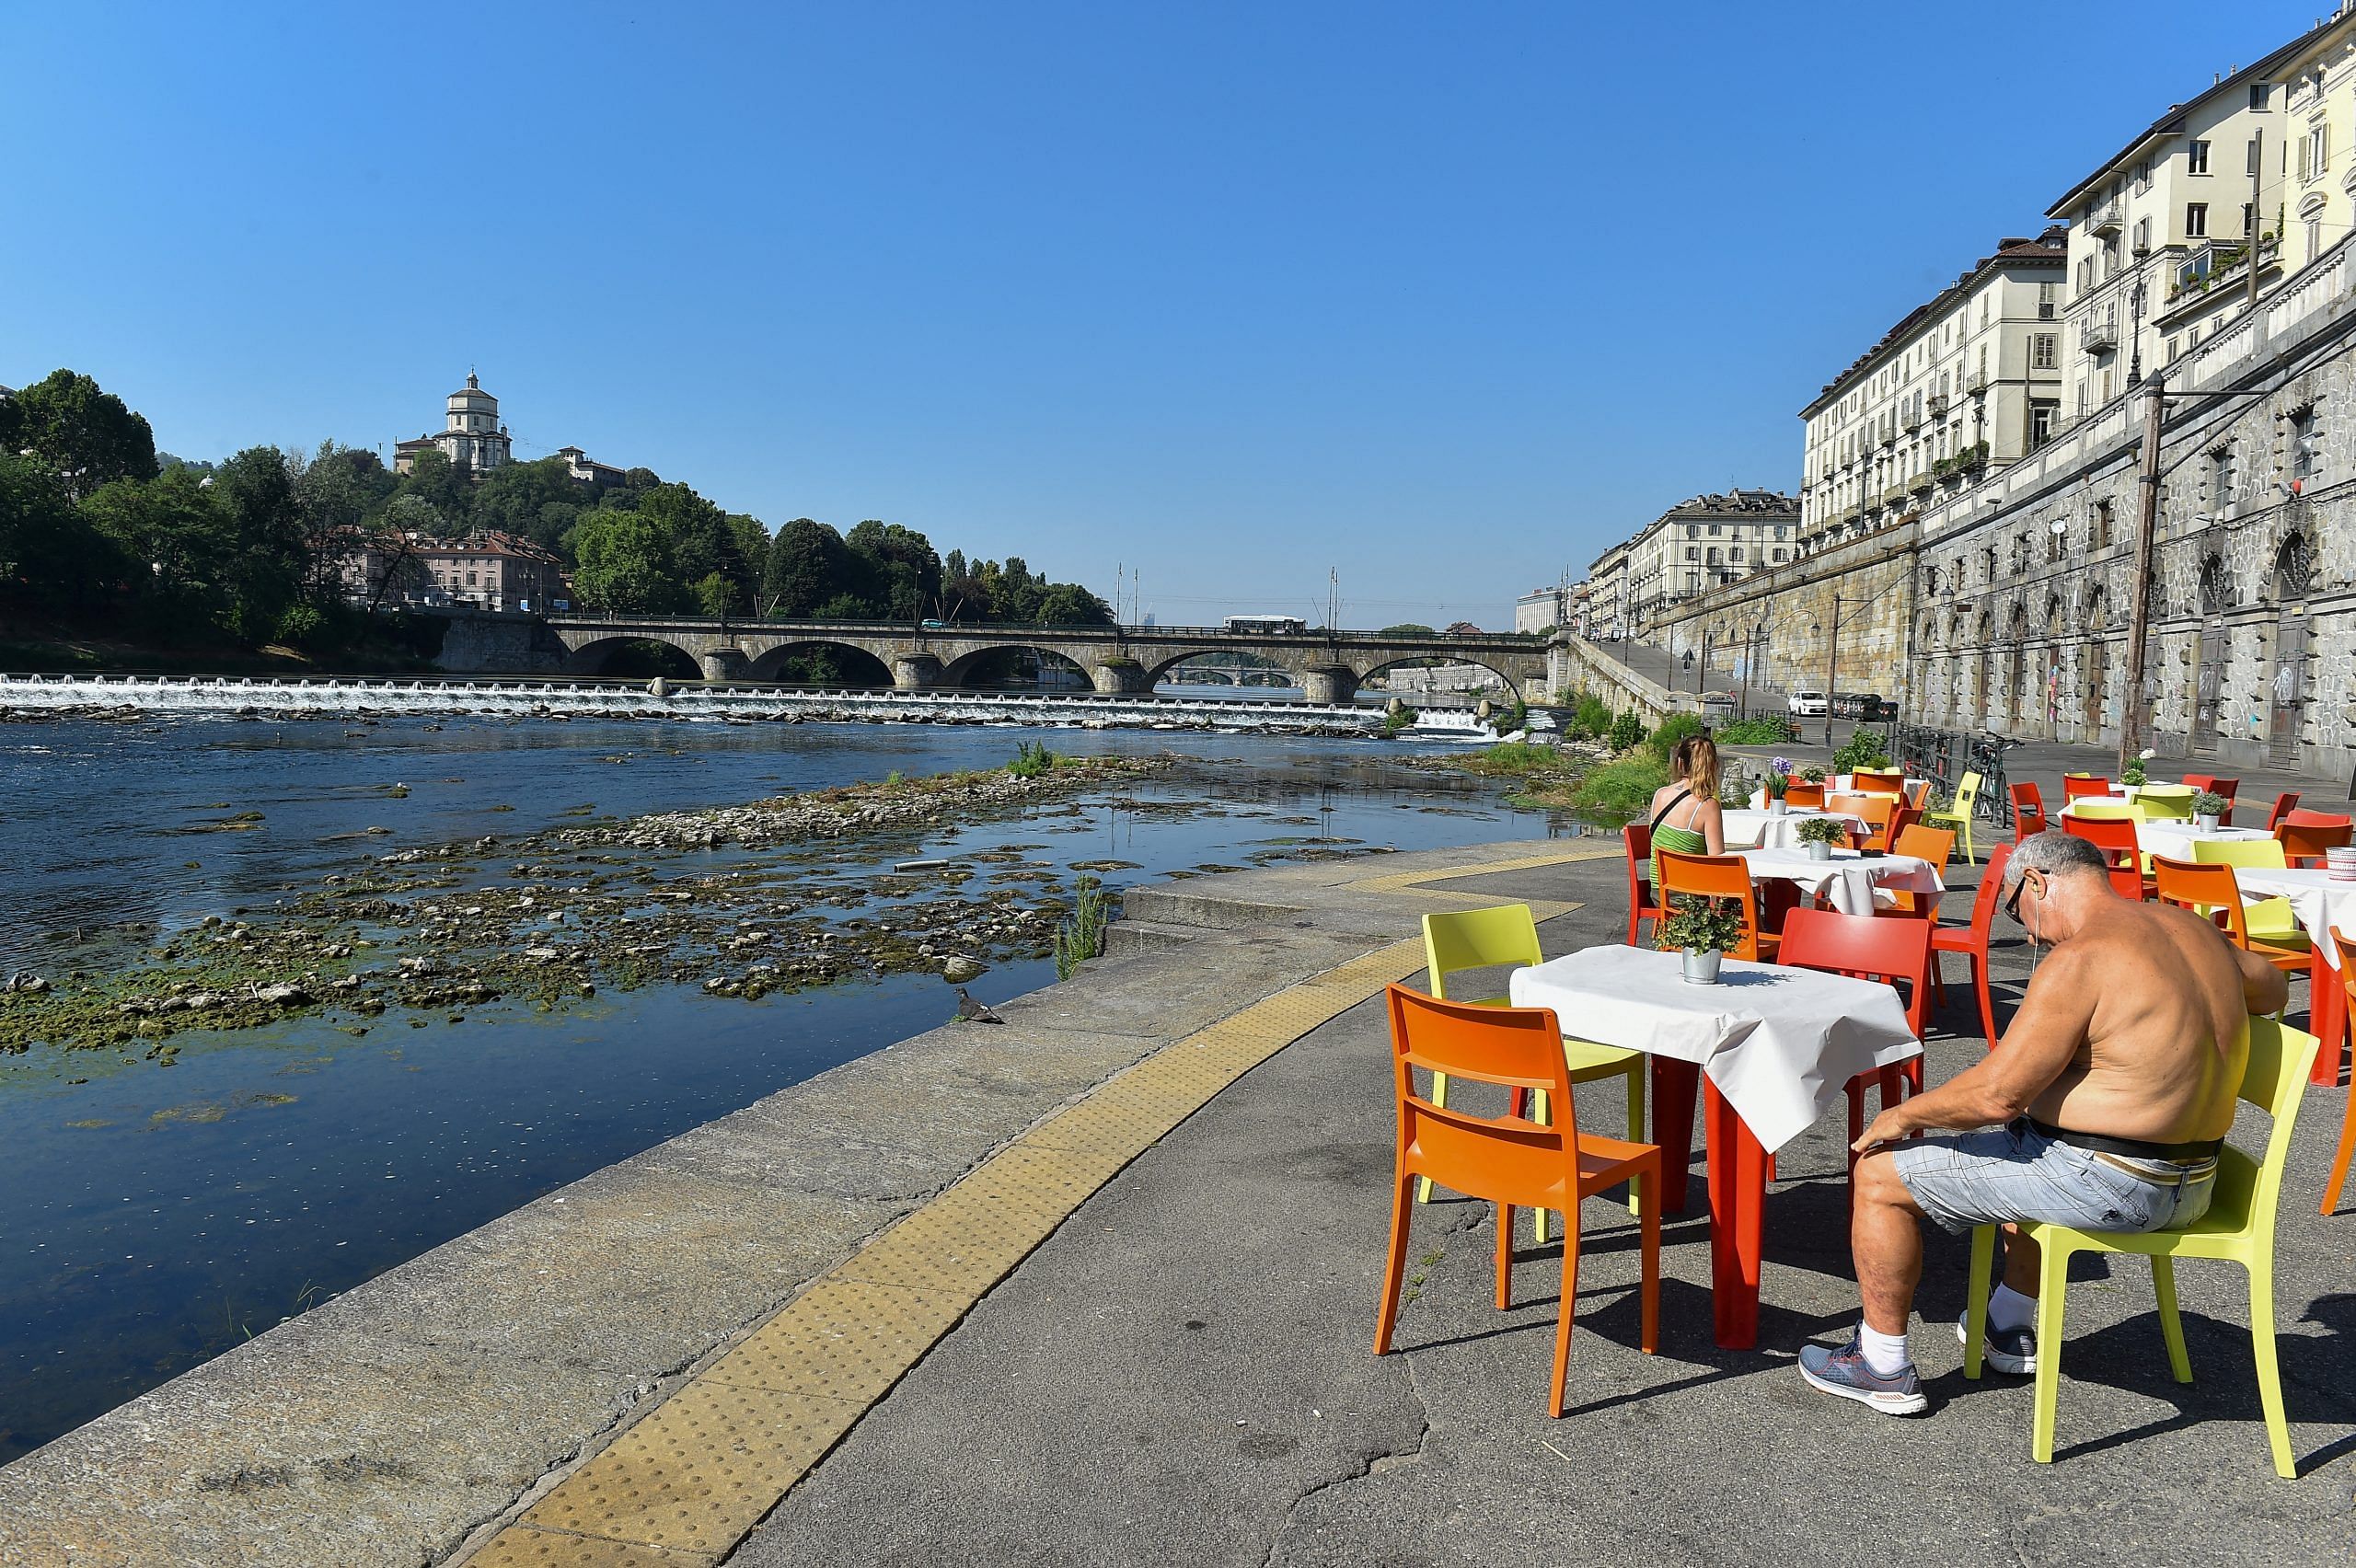 File photo: A view shows restaurant tables next to Po's dry riverbed, as parts of Italy's longest river have dried up due to the worst drought in the last 70 years, in Turin, Italy | Reuters | Massimo Pinca